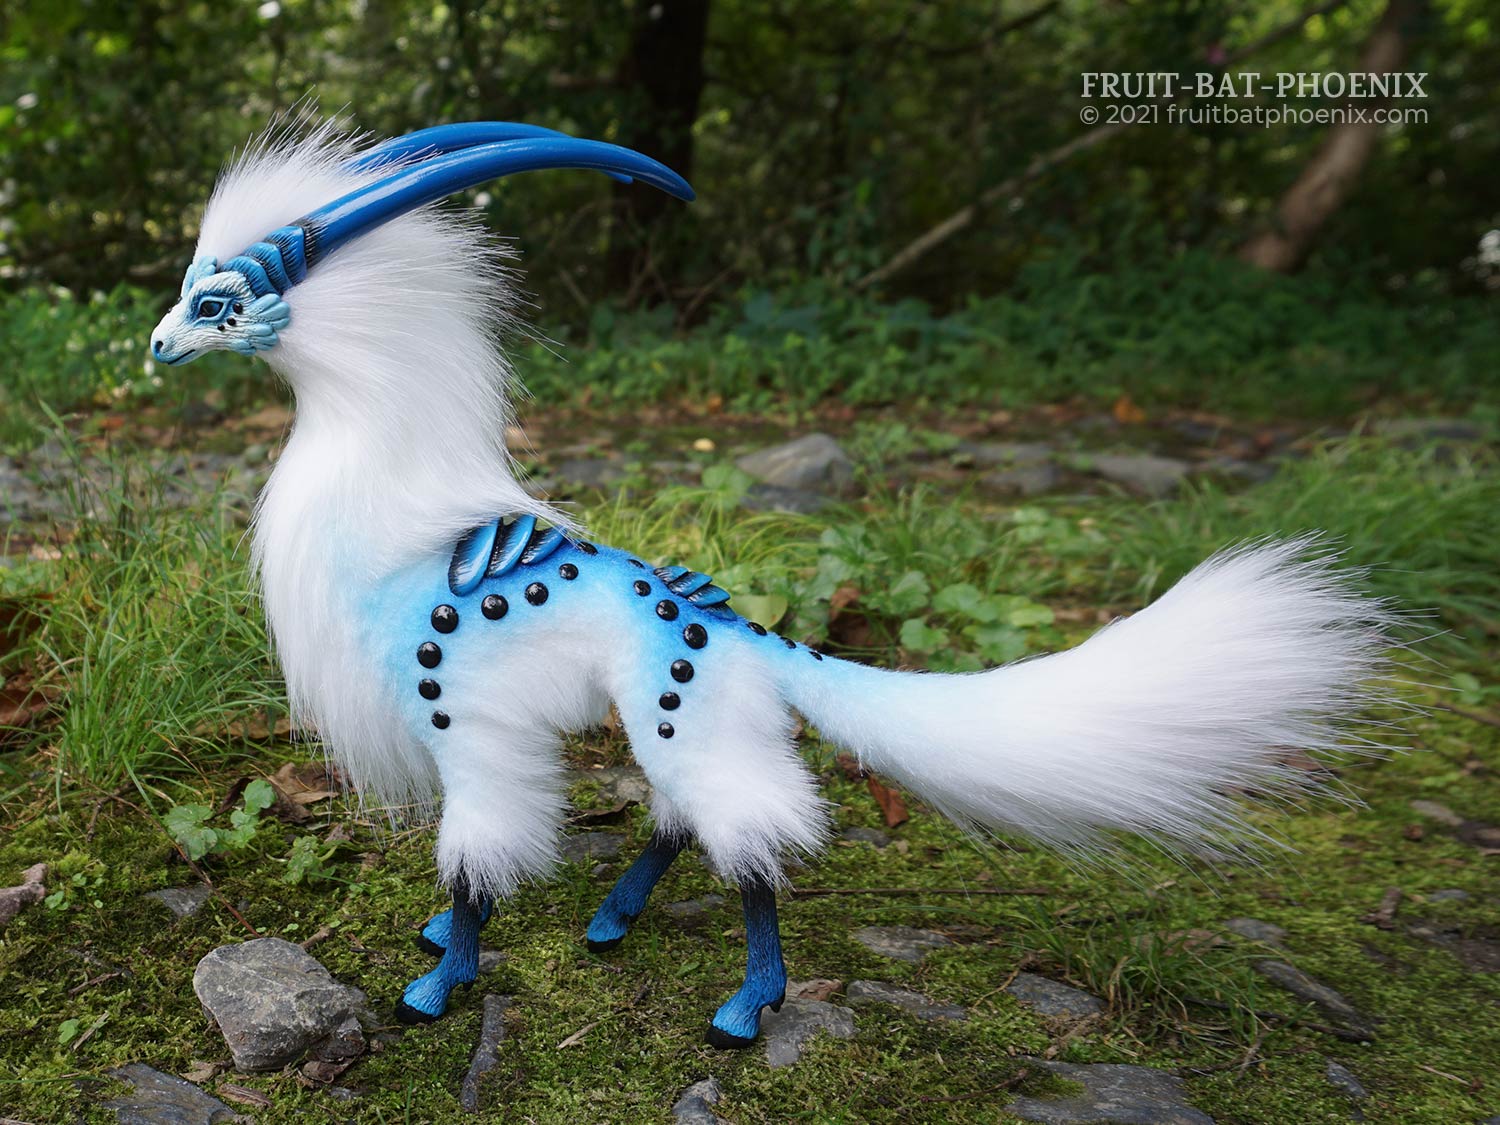 Cloud Antelope III, a white and blue graceful horned creature art doll